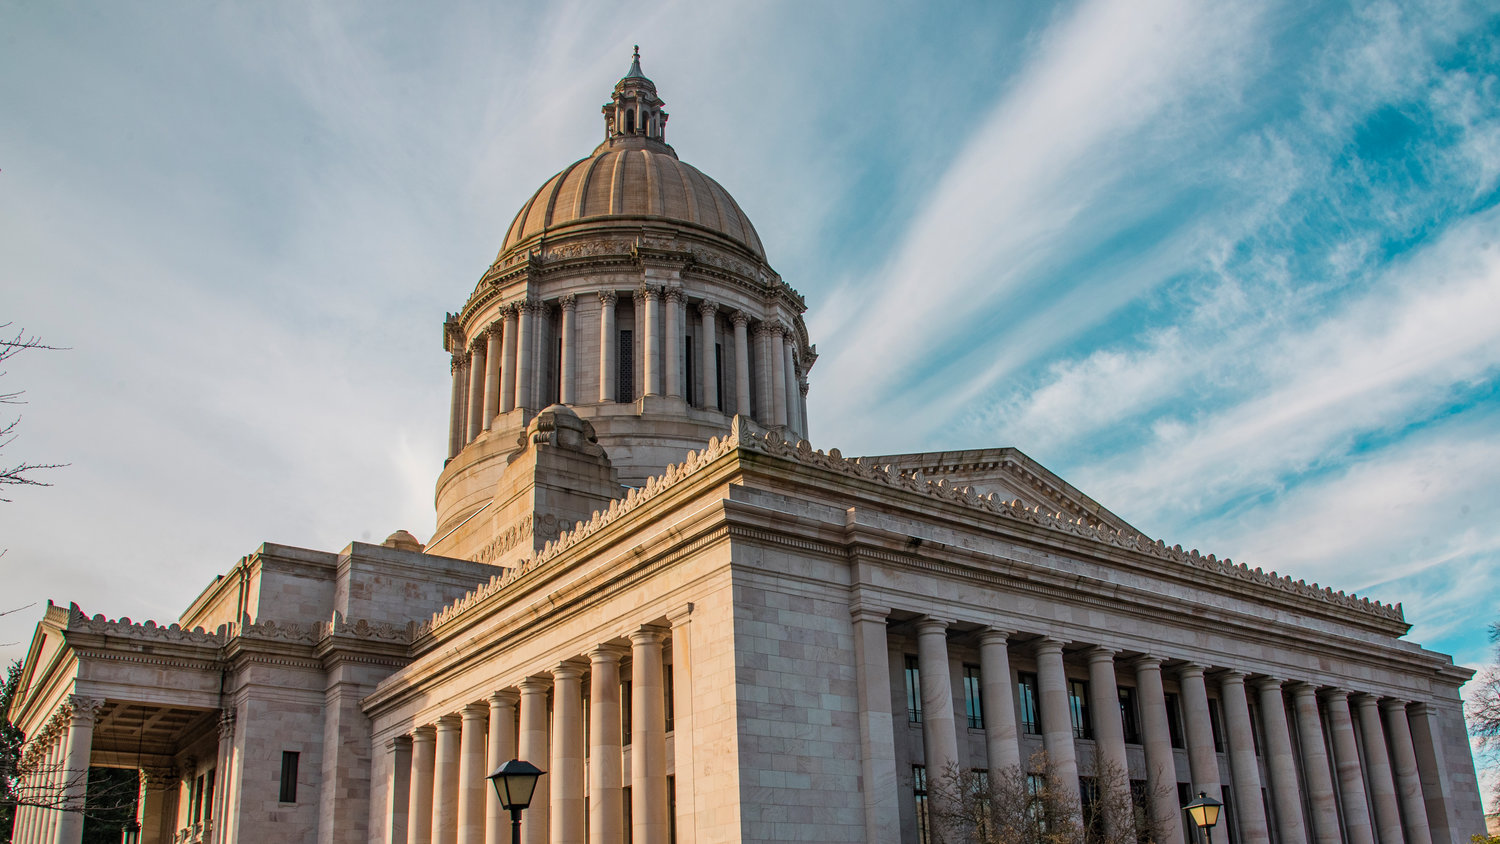 The Washington State Capitol building in Olympia is pictured.